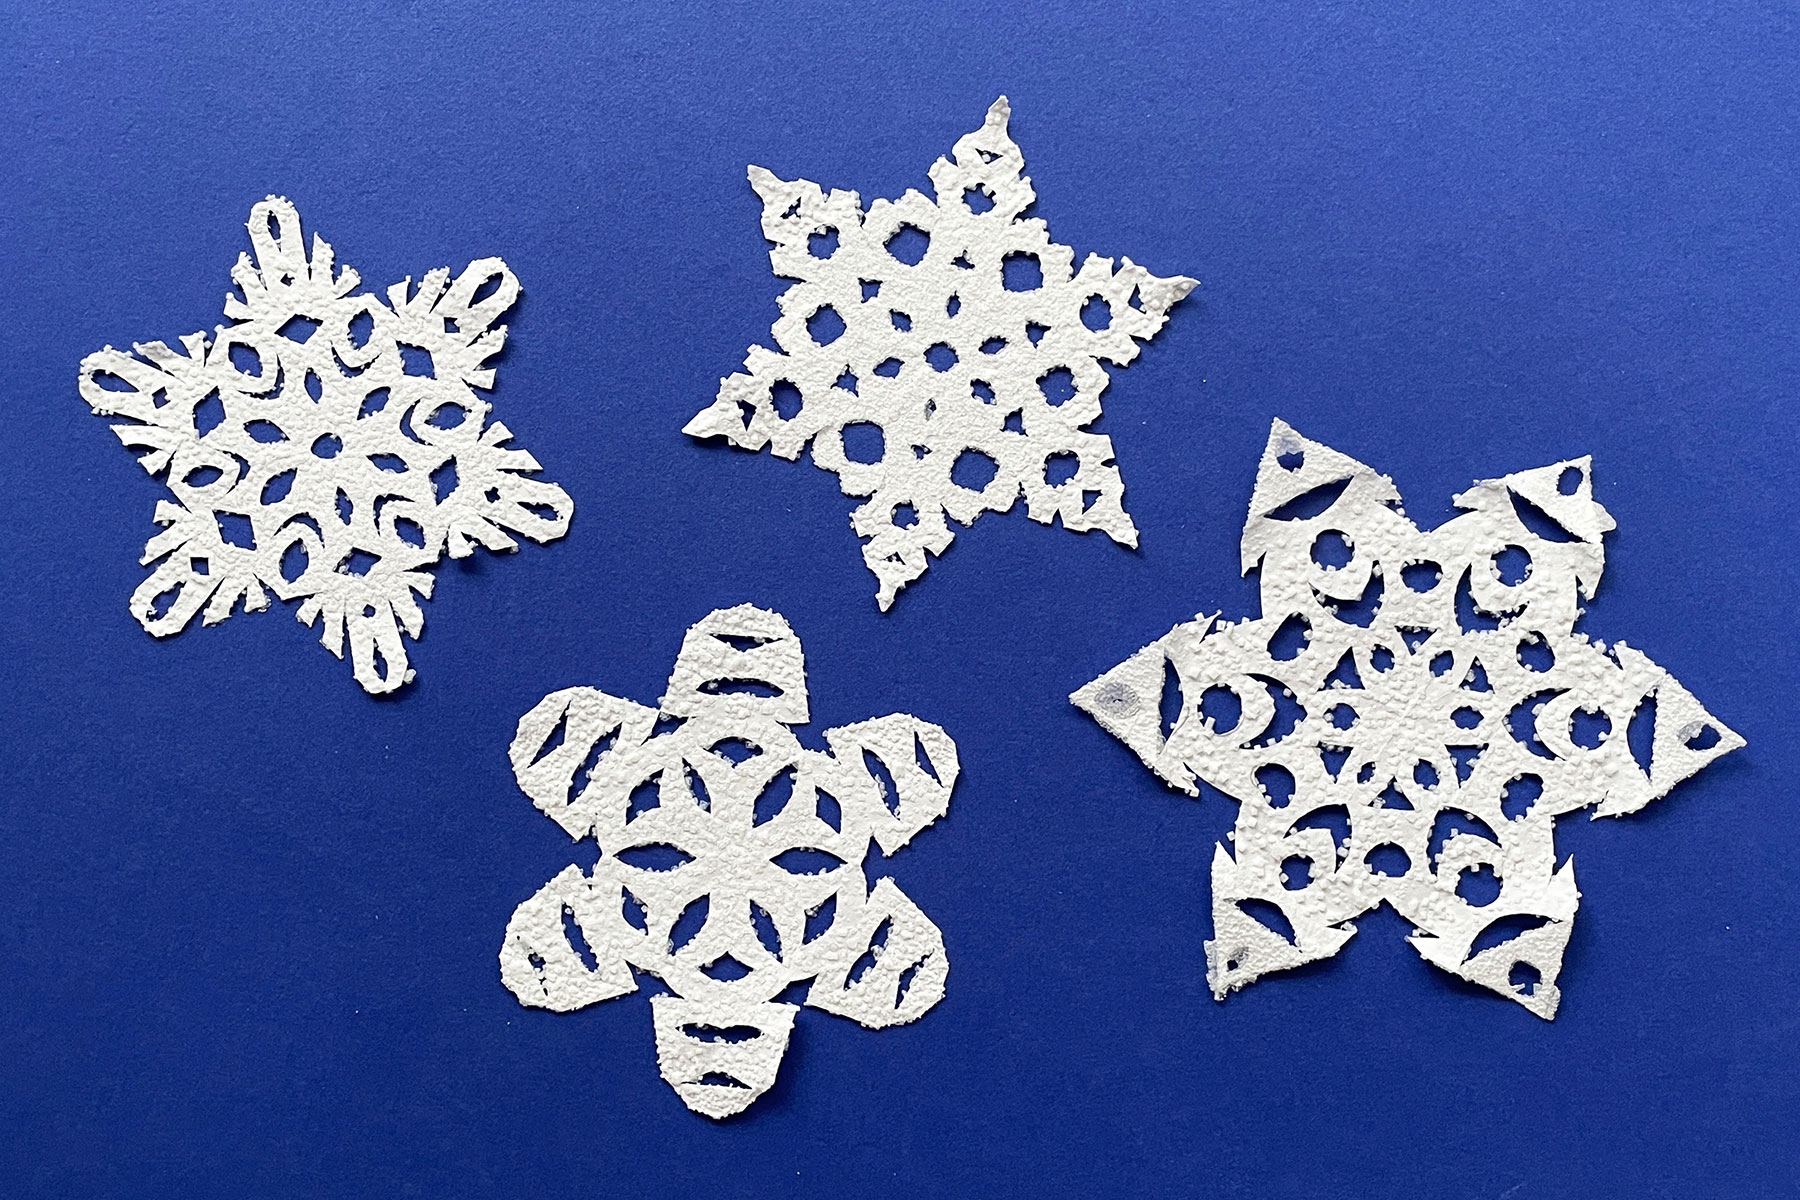 A photo of four paper snowflakes covered in salt crystals laid out next to each other on a dark blue table